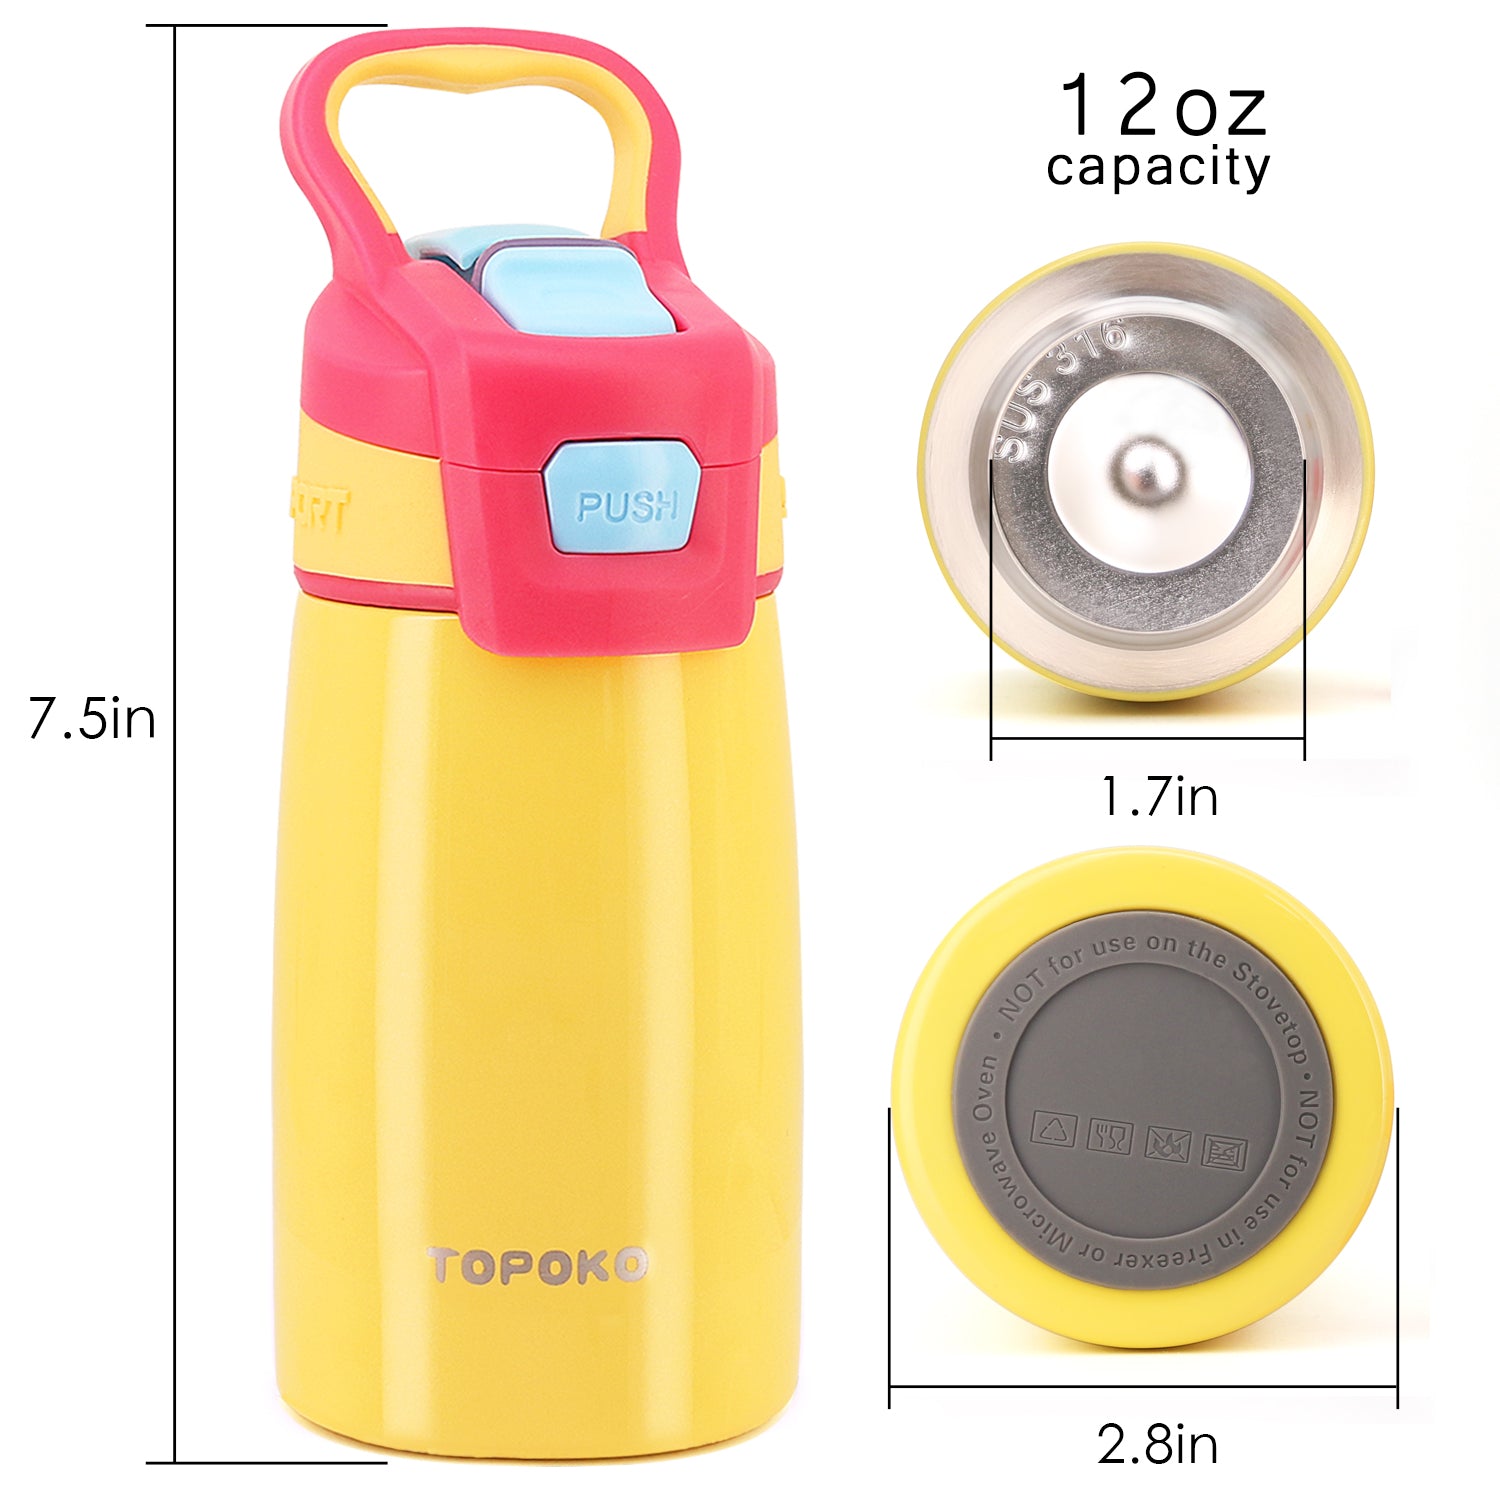 SKATER Kids thermos Cup for girls - buy online from Japan